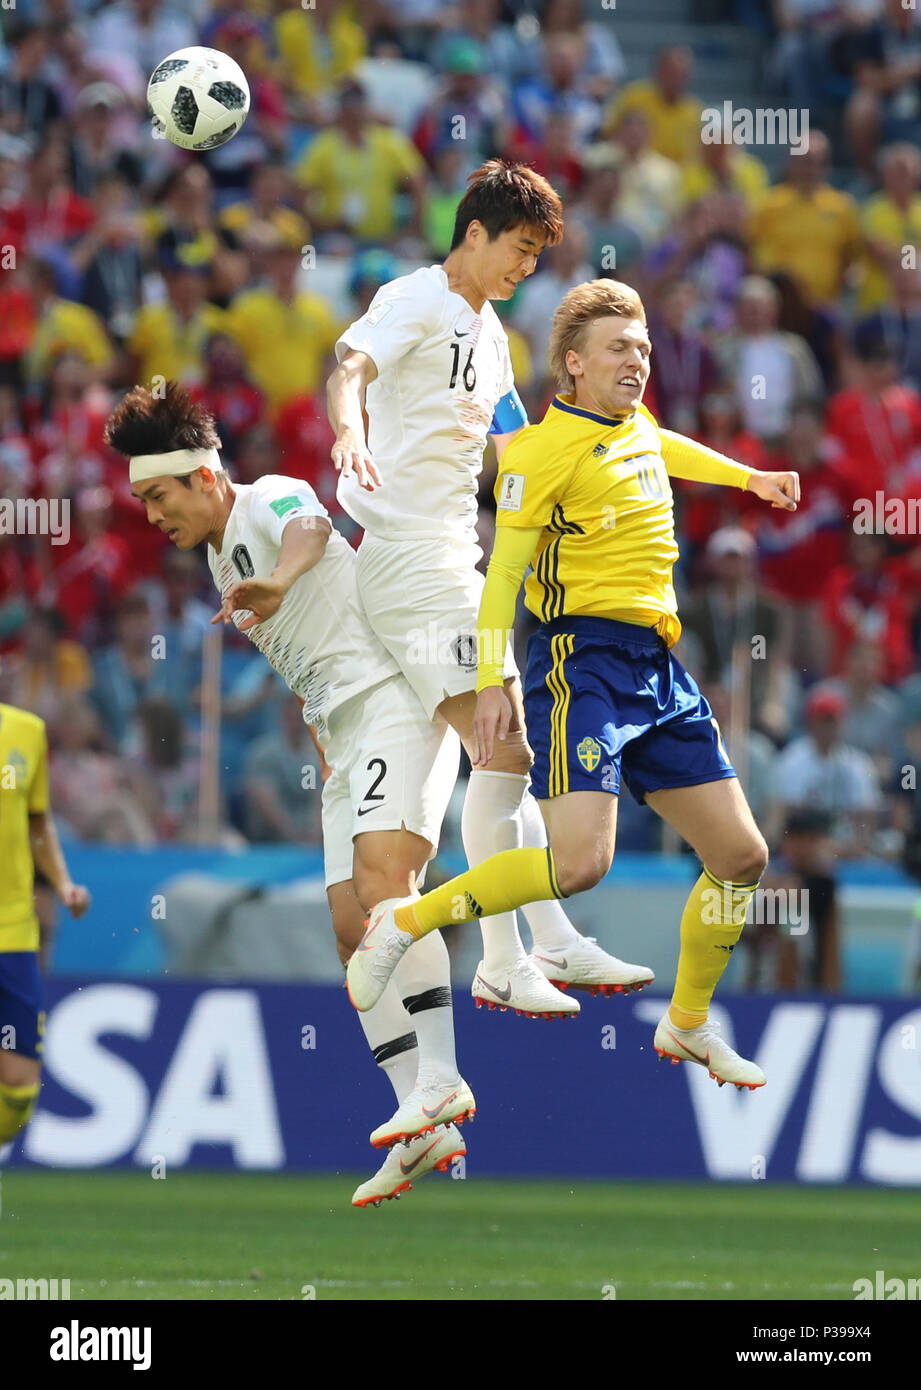 Nizhni Novgorod. 18th June, 2018. Ki Sungyueng (C) of South Korea vies with Emil Forsberg (R) of Sweden during a group F match between Sweden and South Korea at the 2018 FIFA World Cup in Nizhni-Novgorod, Russia, June 18, 2018. Credit: Yang Lei/Xinhua/Alamy Live News Stock Photo